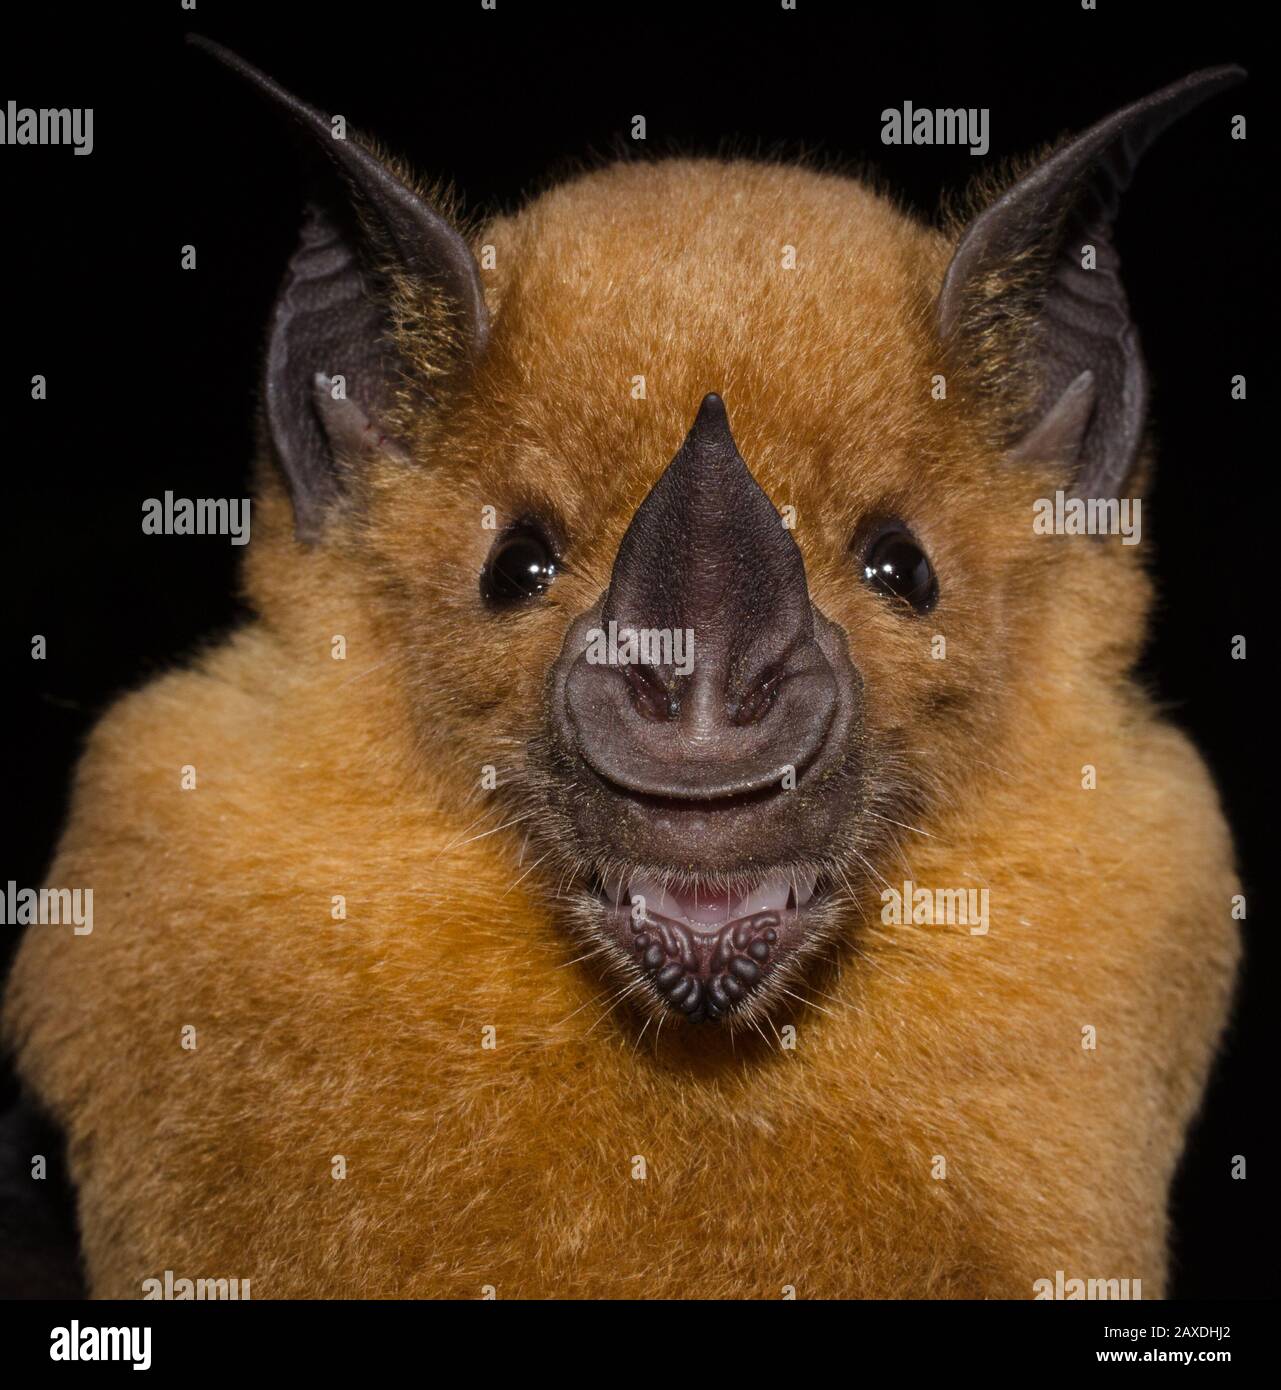 The greater spear-nosed bat (Phyllostomus hastatus) is a bat species of the family Phyllostomidae from South and Central America.[2] It is one of the Stock Photo